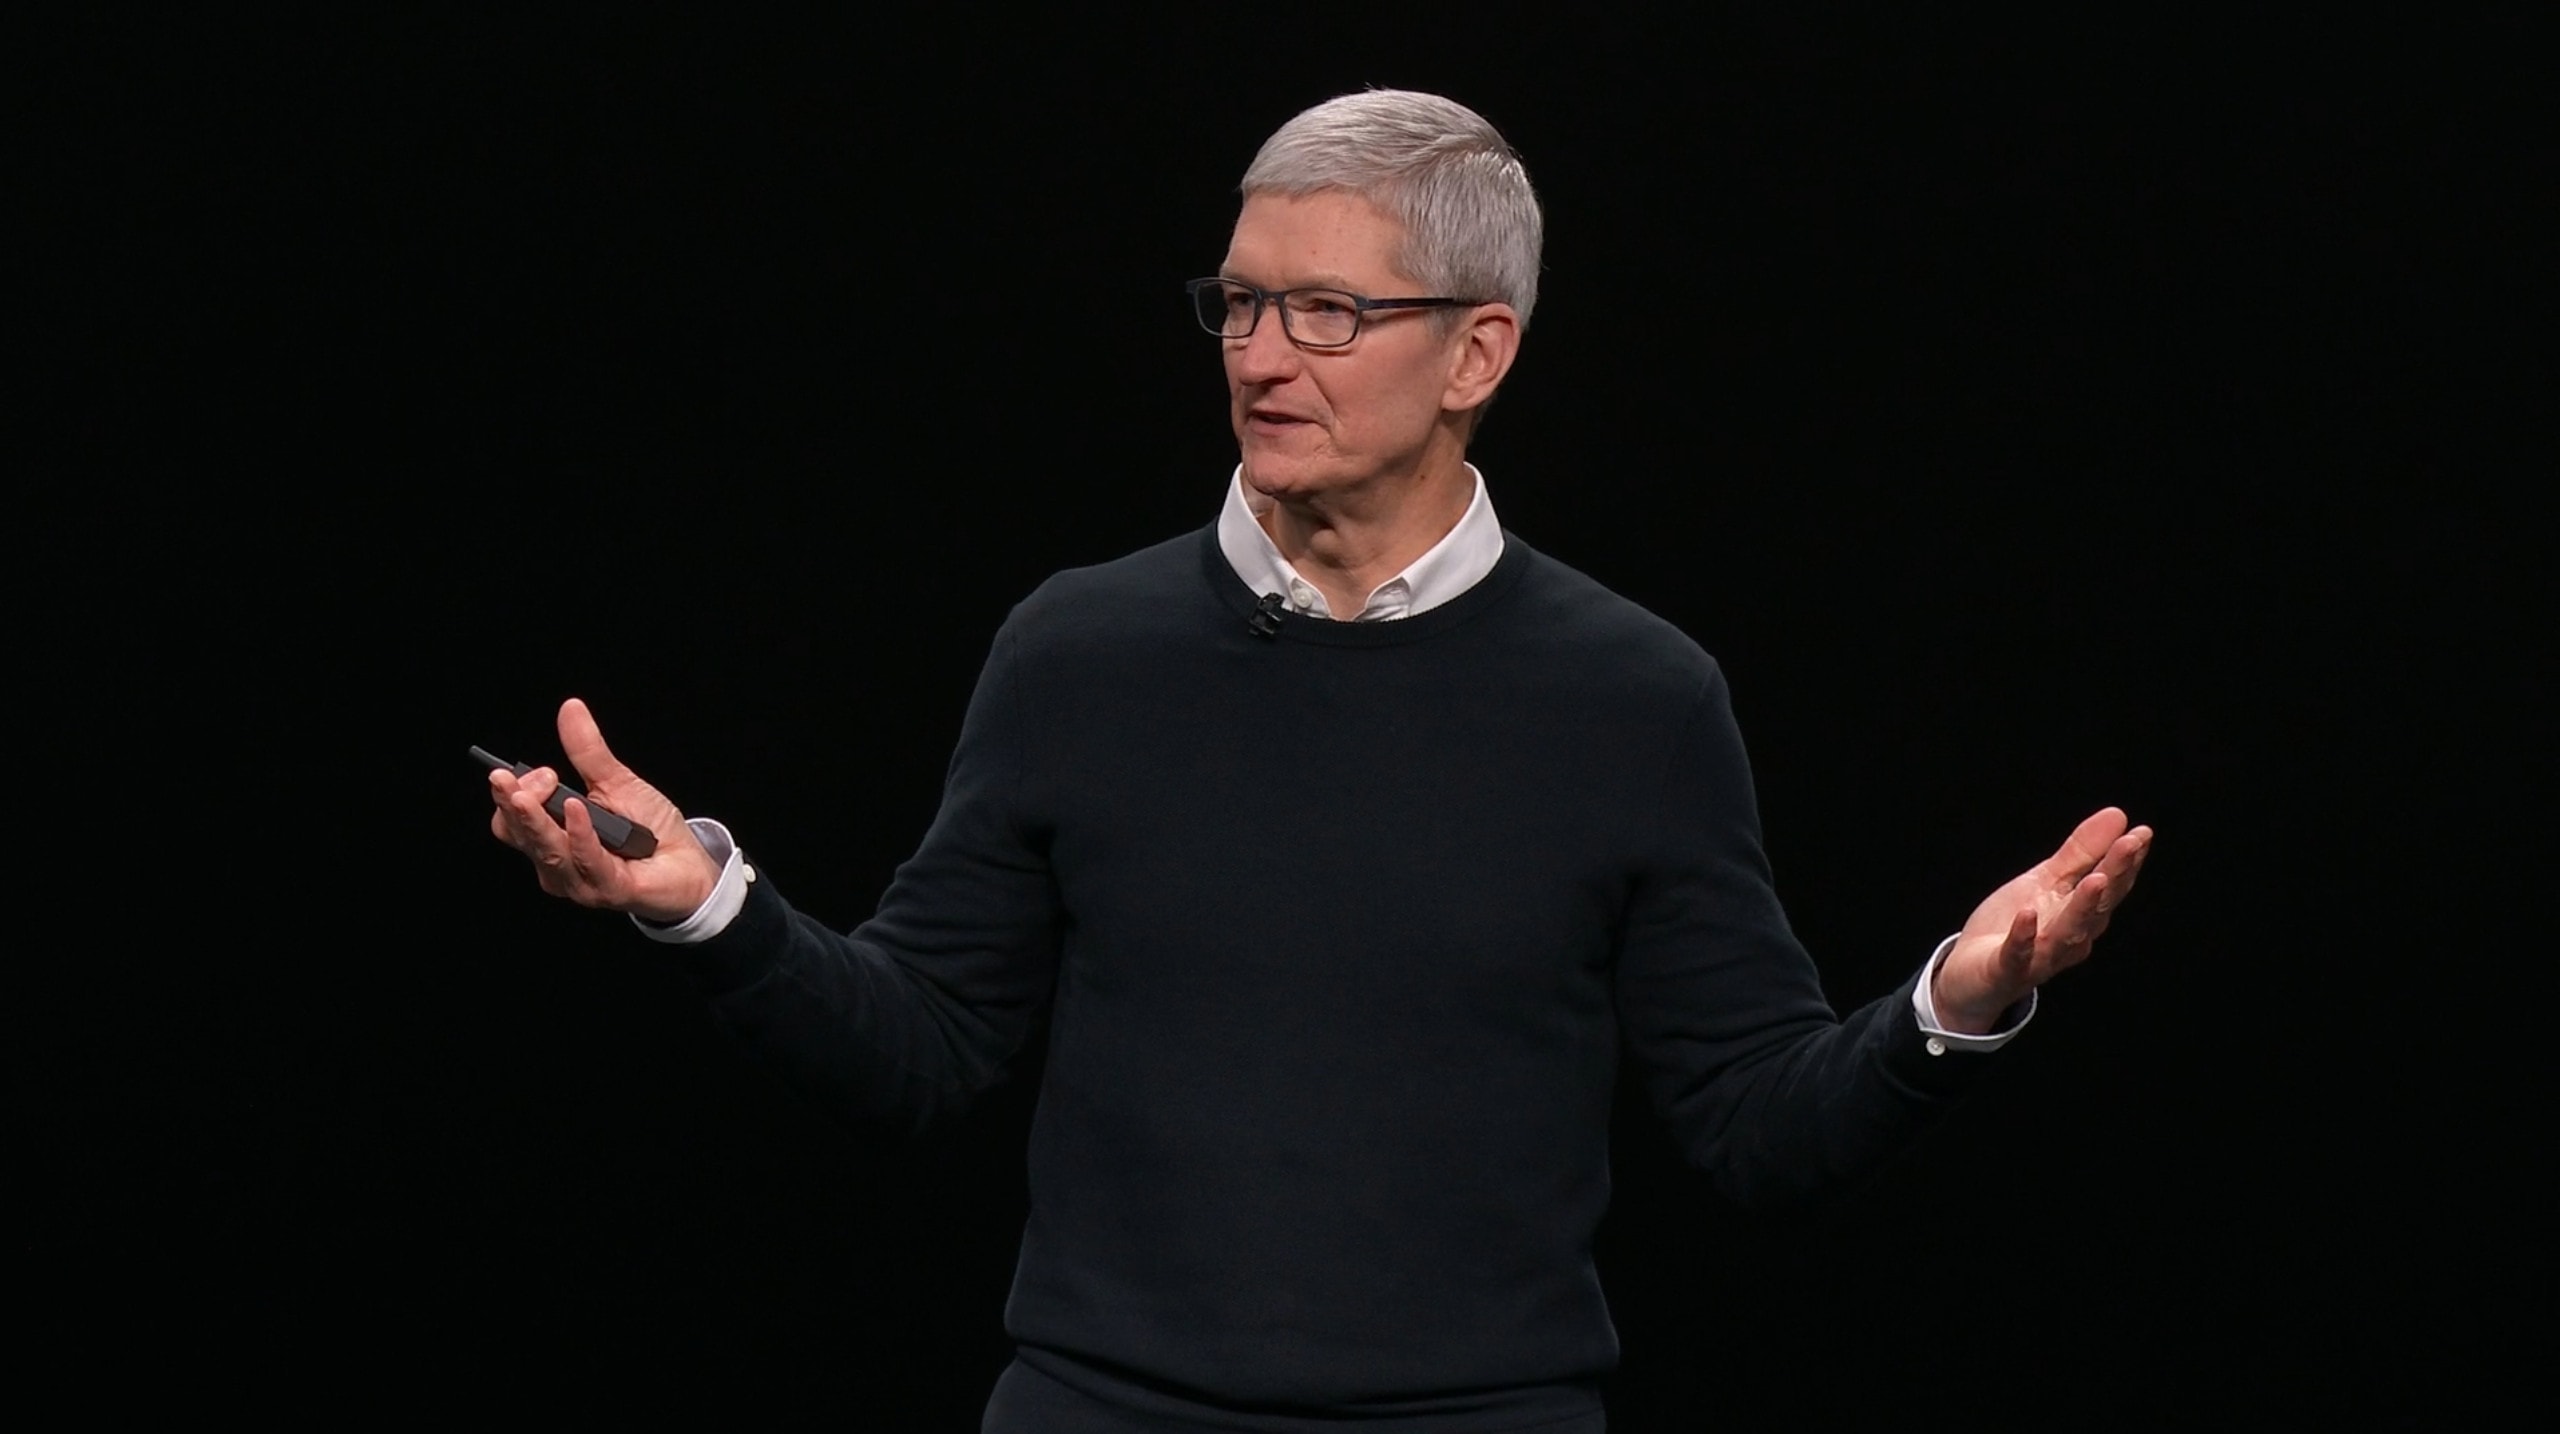 2018 interview with Tim Cook suggests Apple was working on iCloud backup encryption